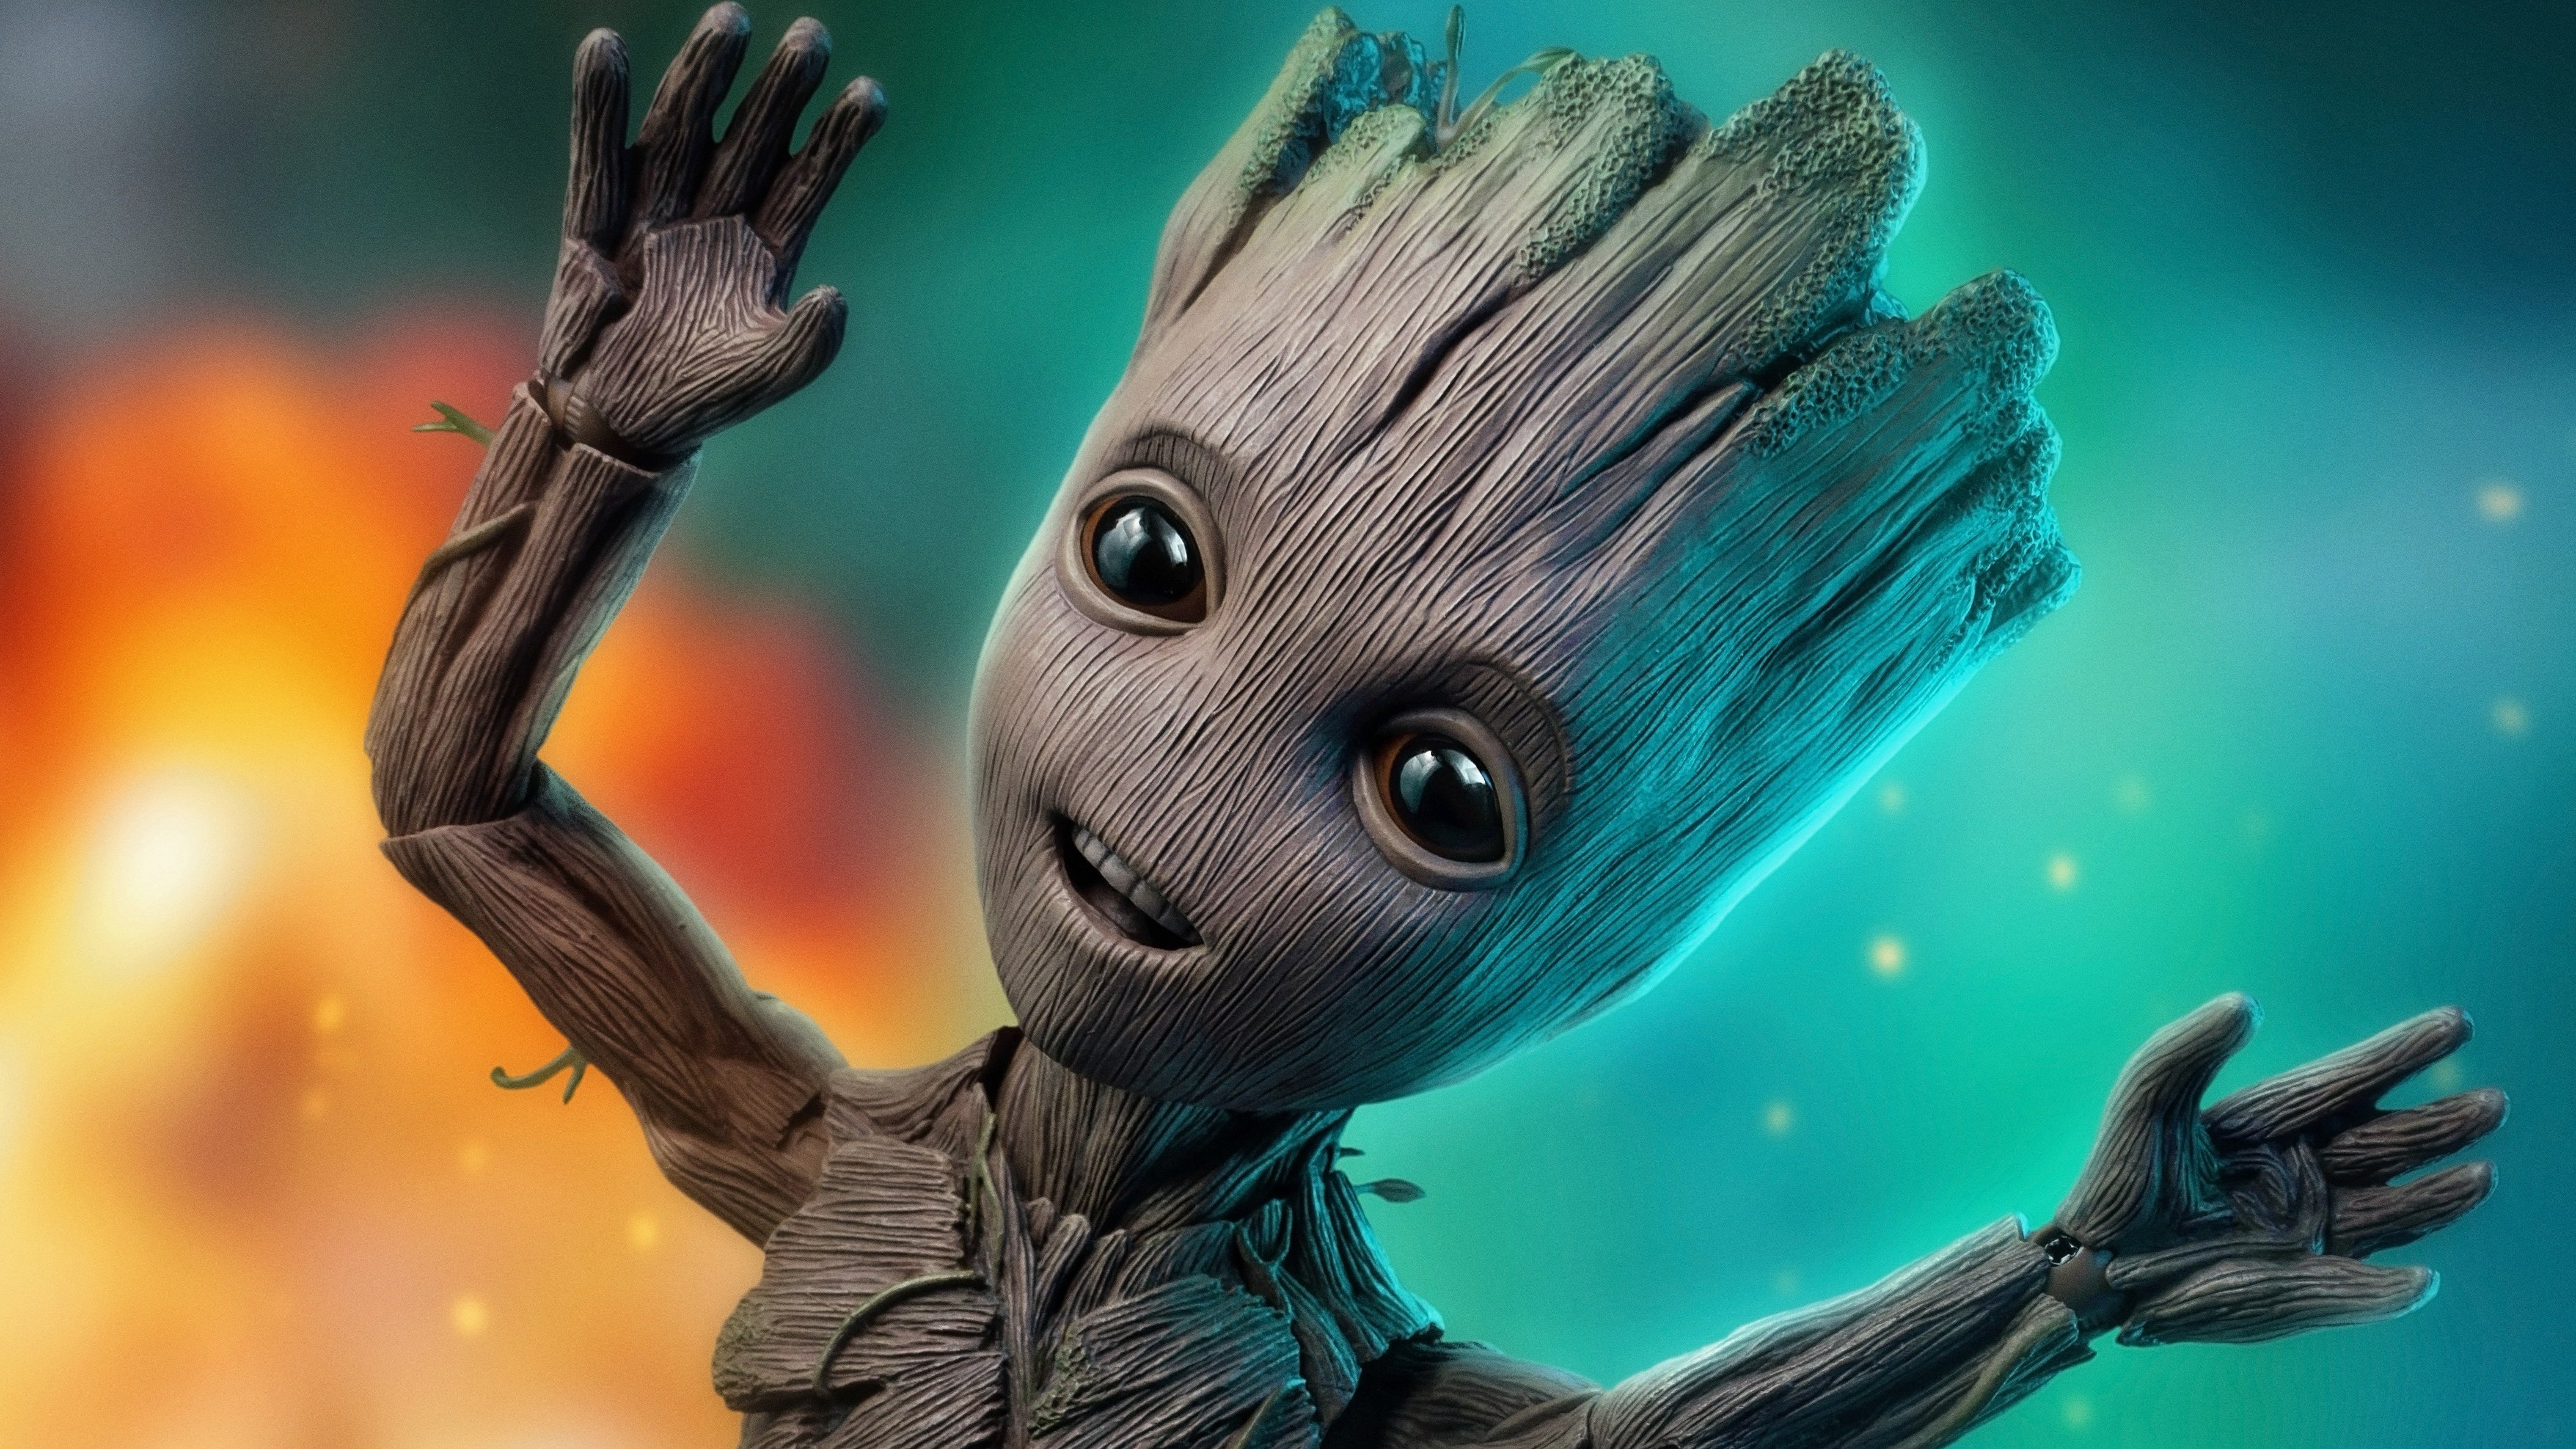 Groot Happy Guardians Of The Galaxy Marvel Cinematic Universe 4216x2372